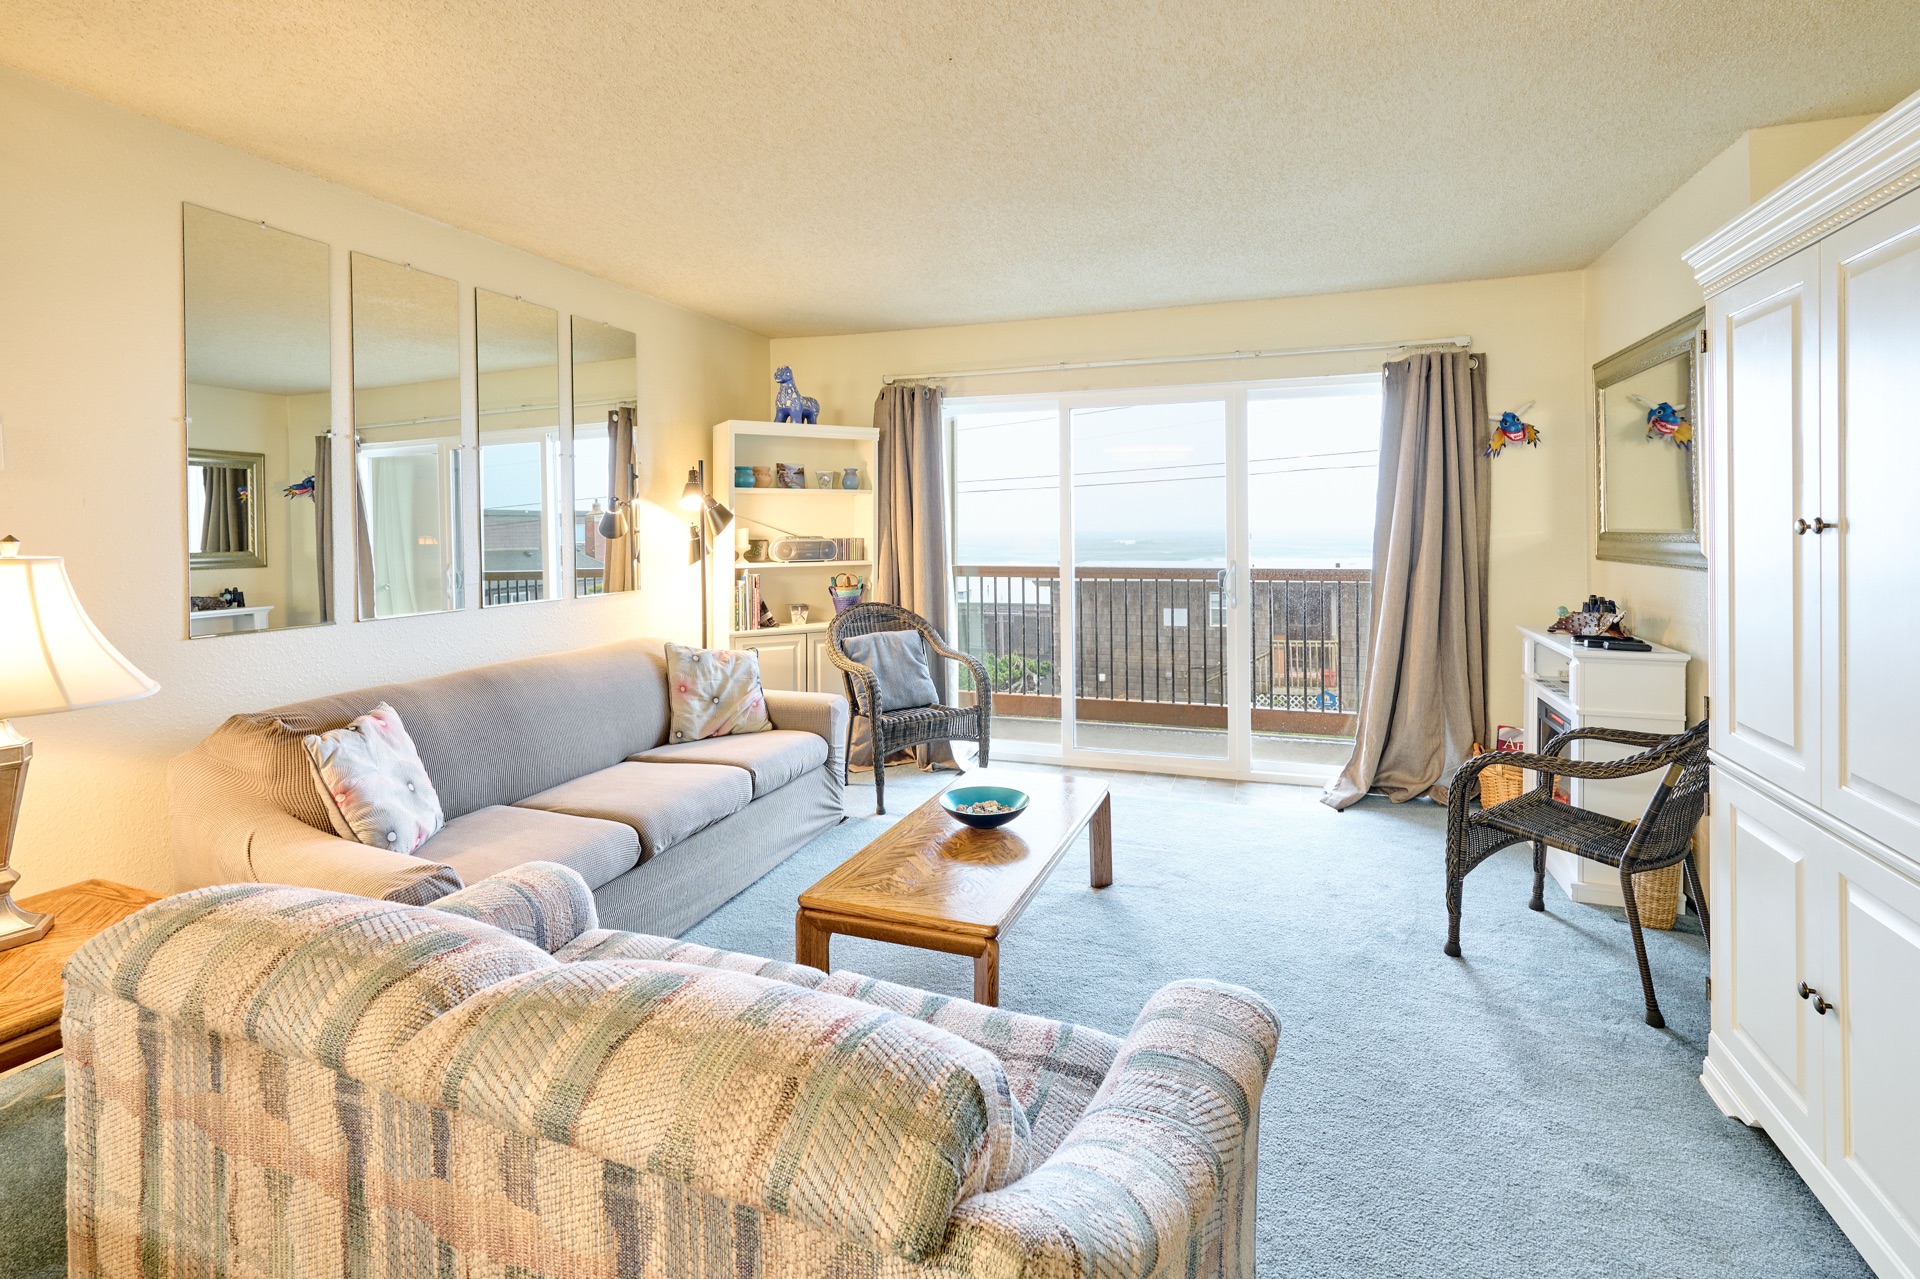 Fishin' Impossible - Come Enjoy This Comfortable Pet-Friendly Condo With Stunning Ocean Views!